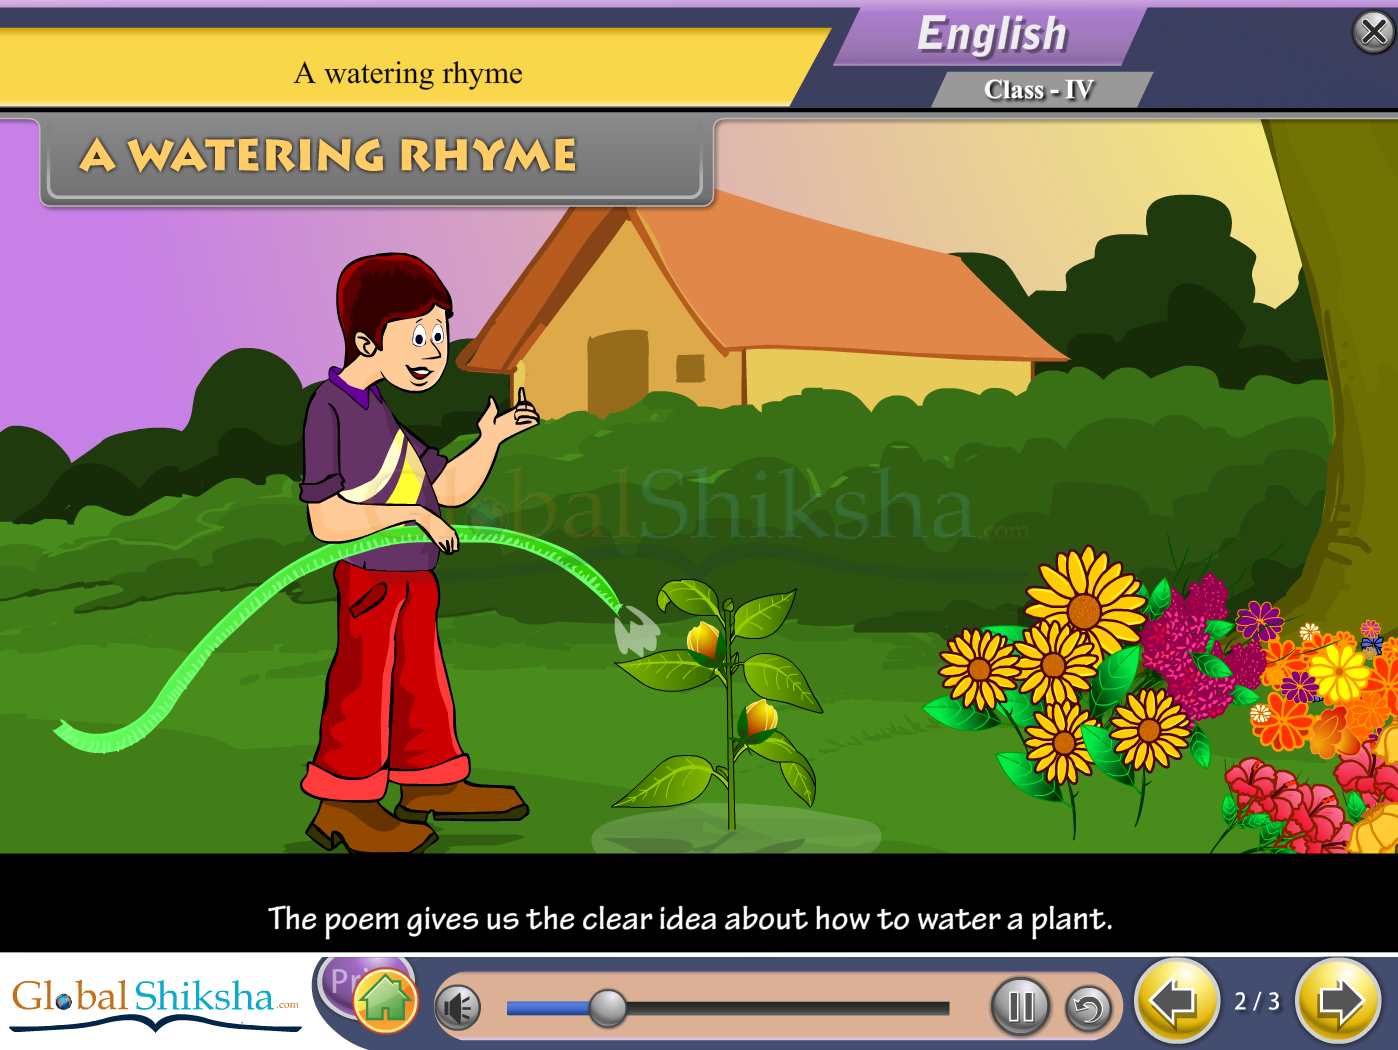 CBSE Class 4 Maths, Science and English Animated Pendrive in English